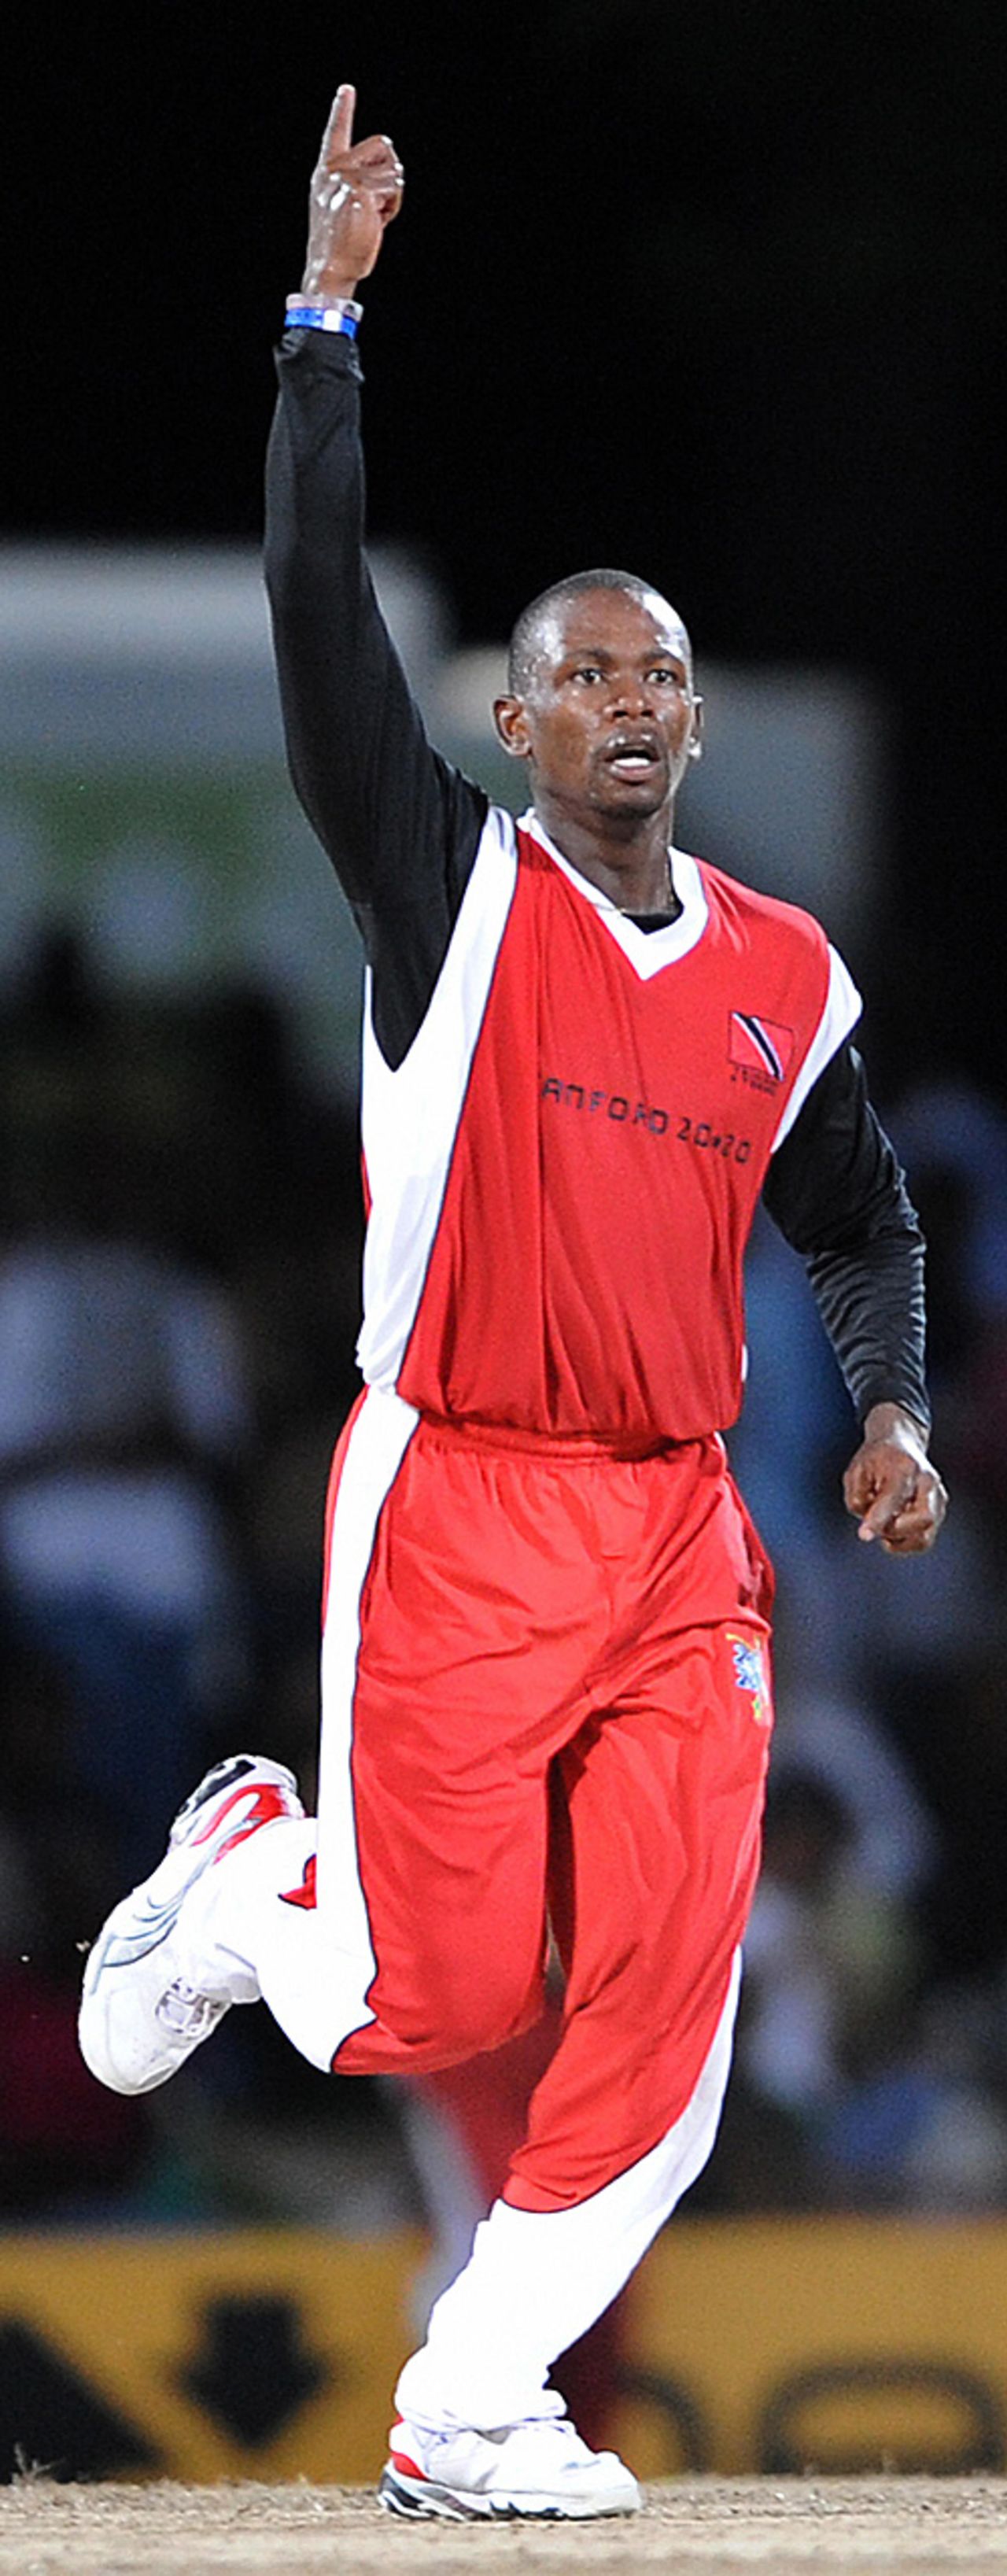 Navin Stewart celebrates one of his two late wickets, Stanford Superstars v Trinidad & Tobago, Antigua, October 25, 2008